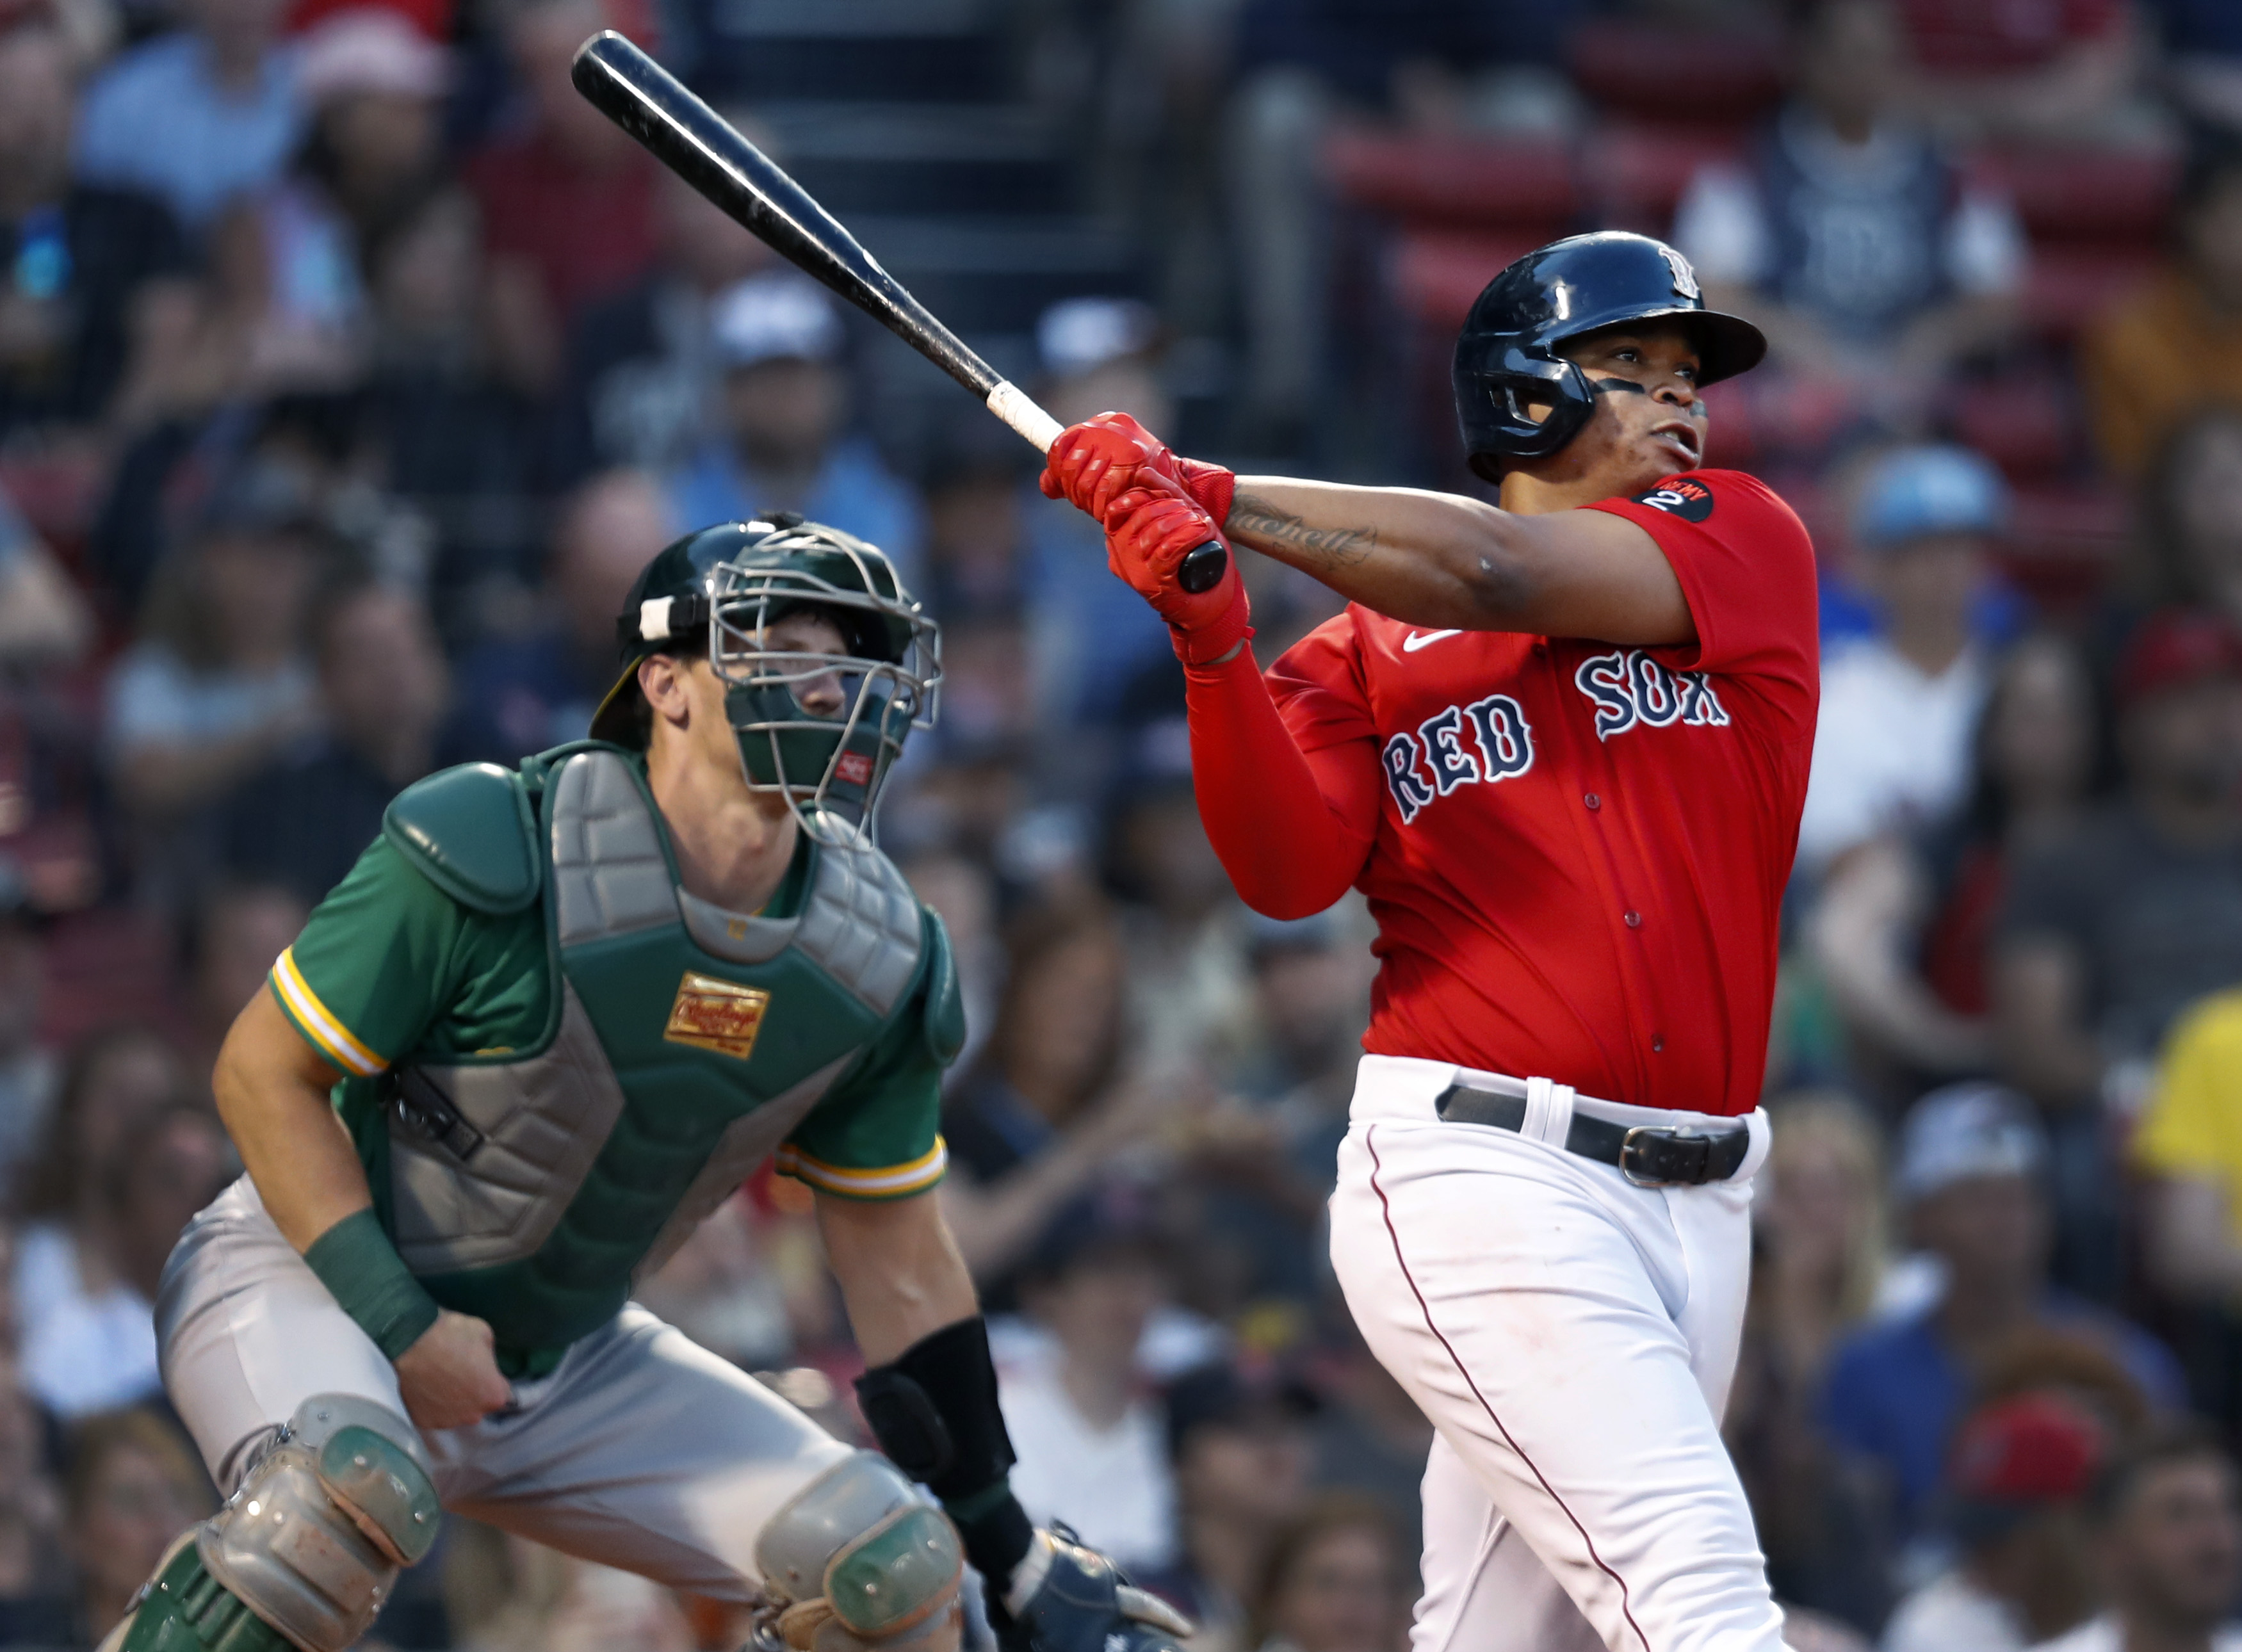 Red Sox vets clashed with top prospect Casas about pregame routine